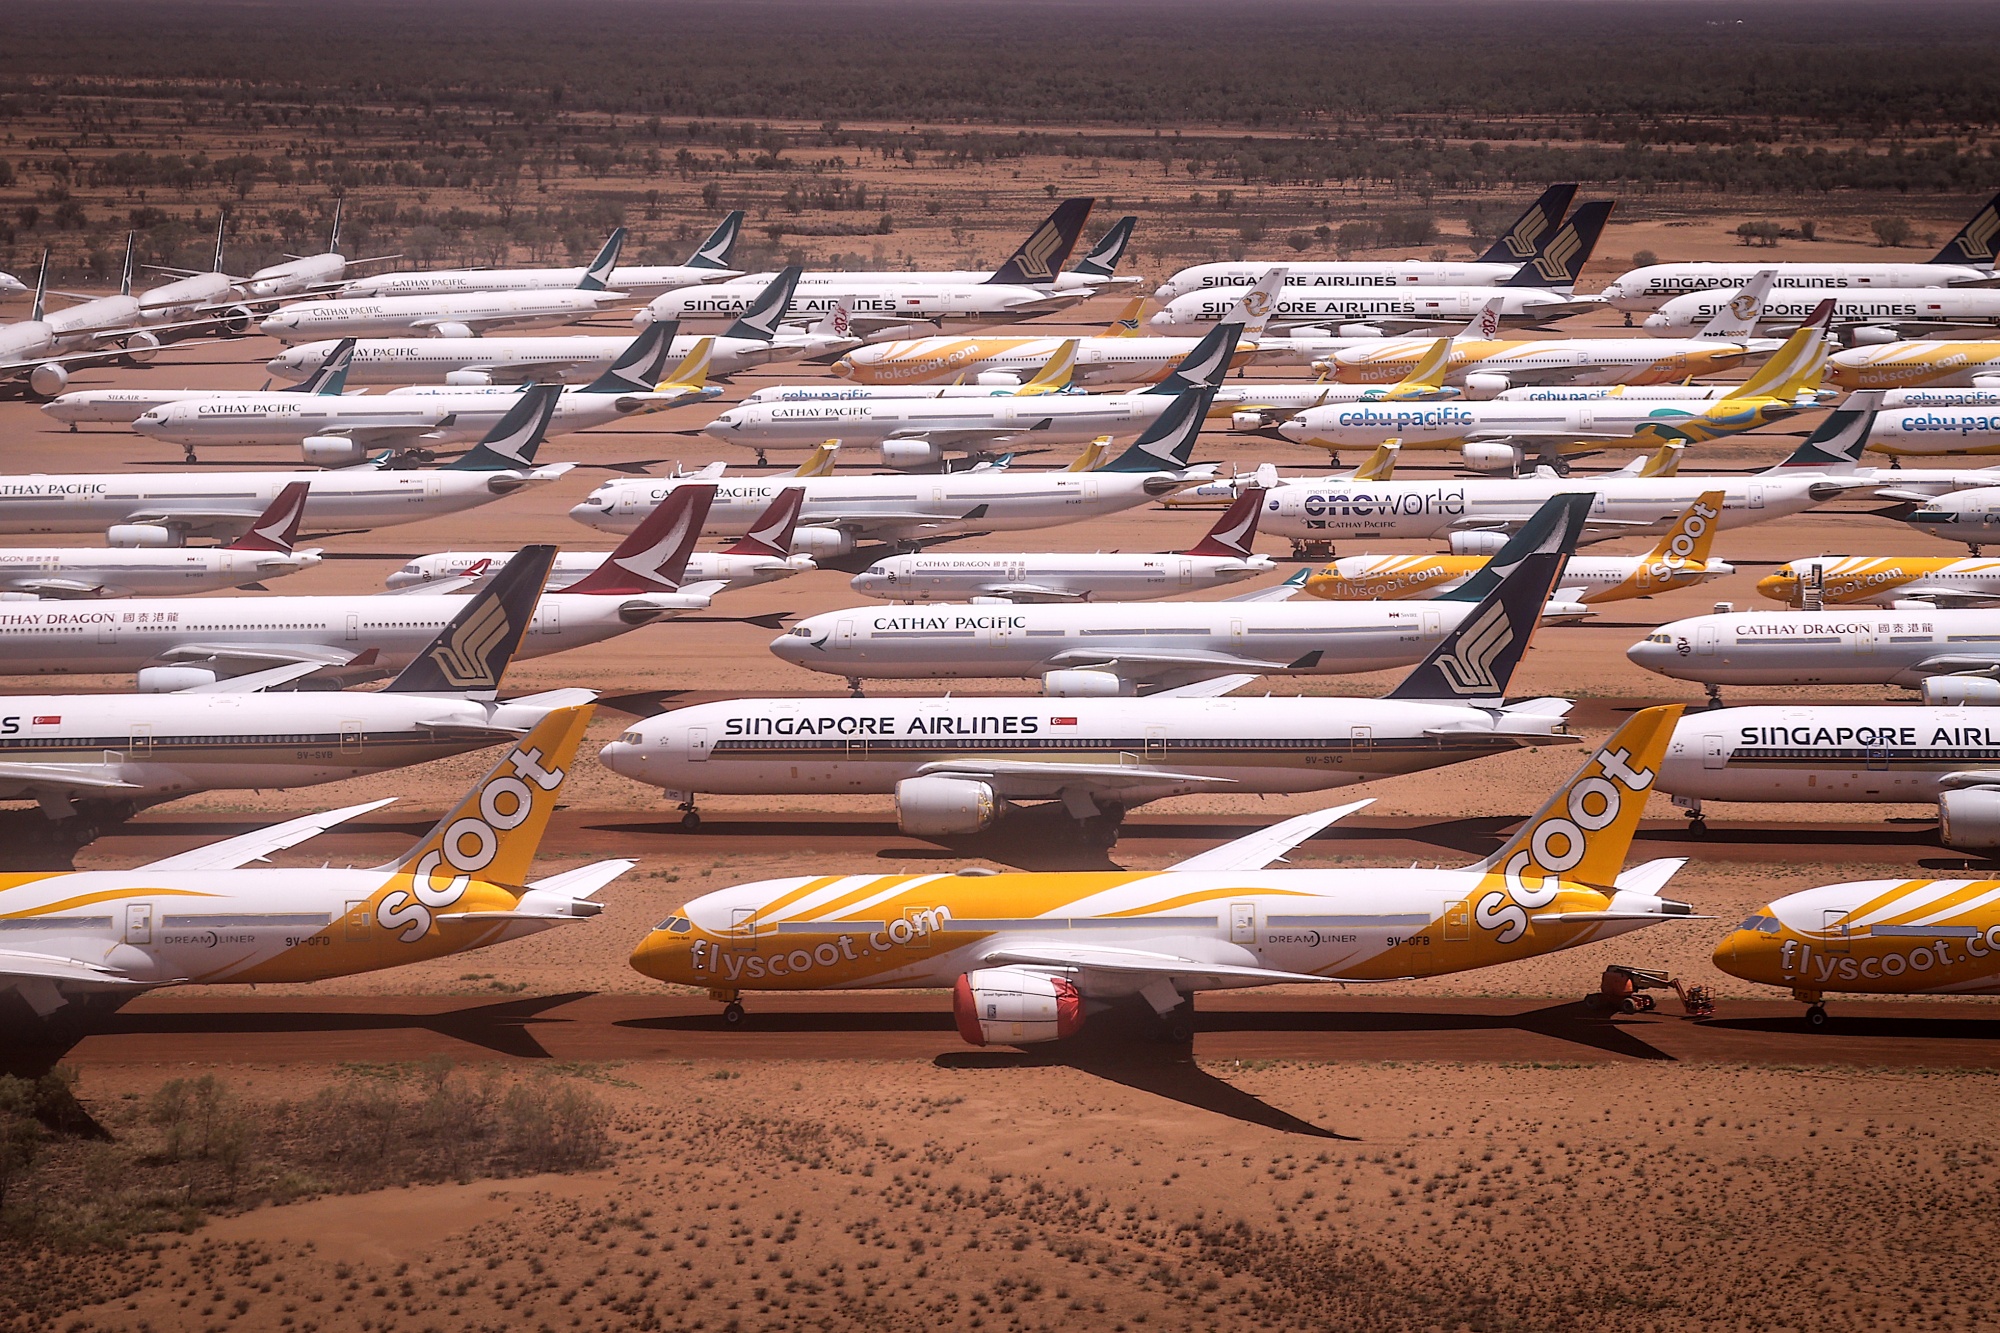 The Asia Pacific Aircraft Storage Facility in Alice Springs, Australia, Oct. 23.